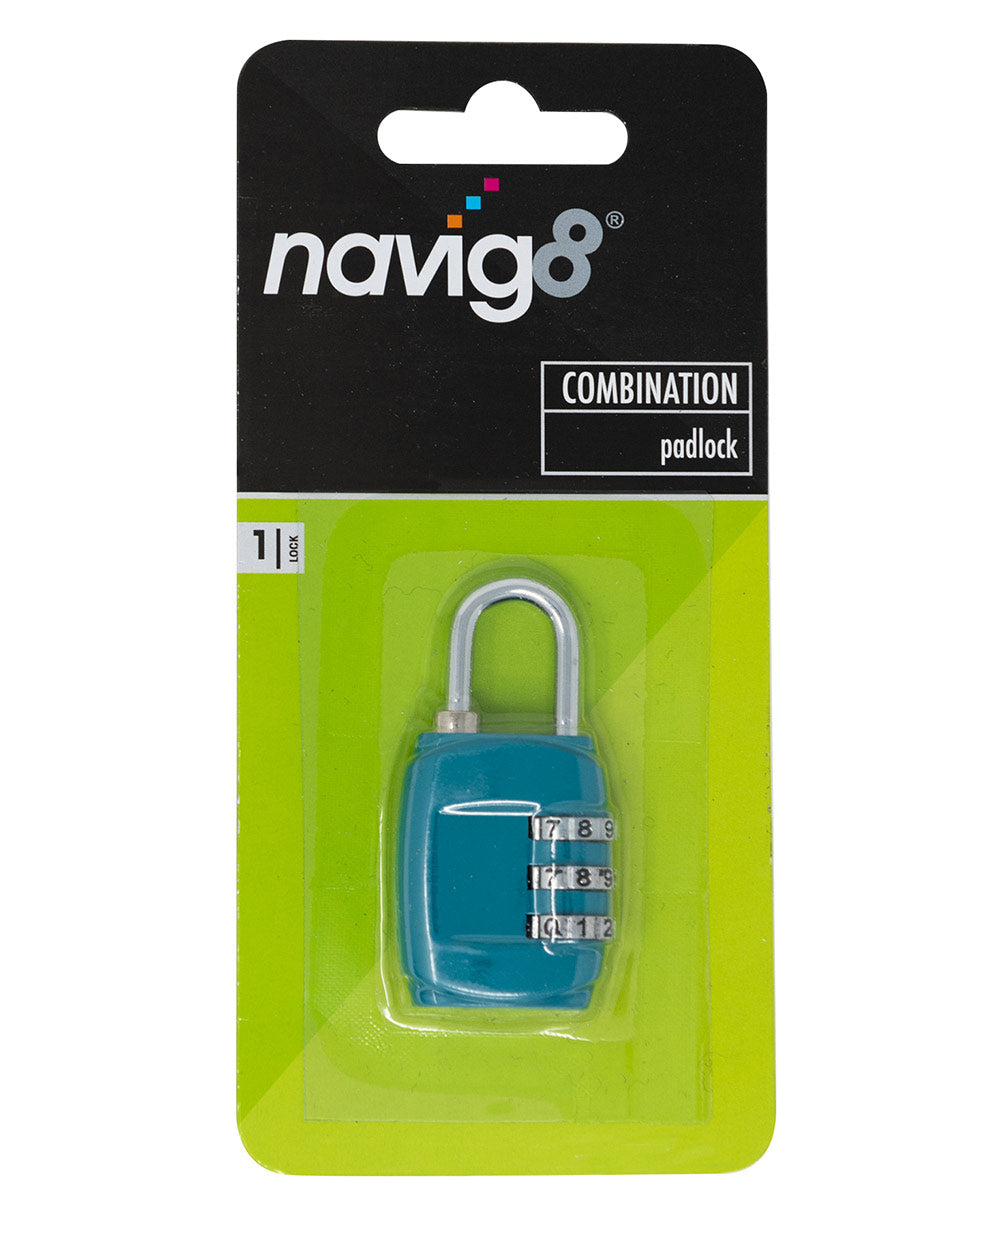 Combination Padlock Suitcase Travel Blue in packaging on a white back ground